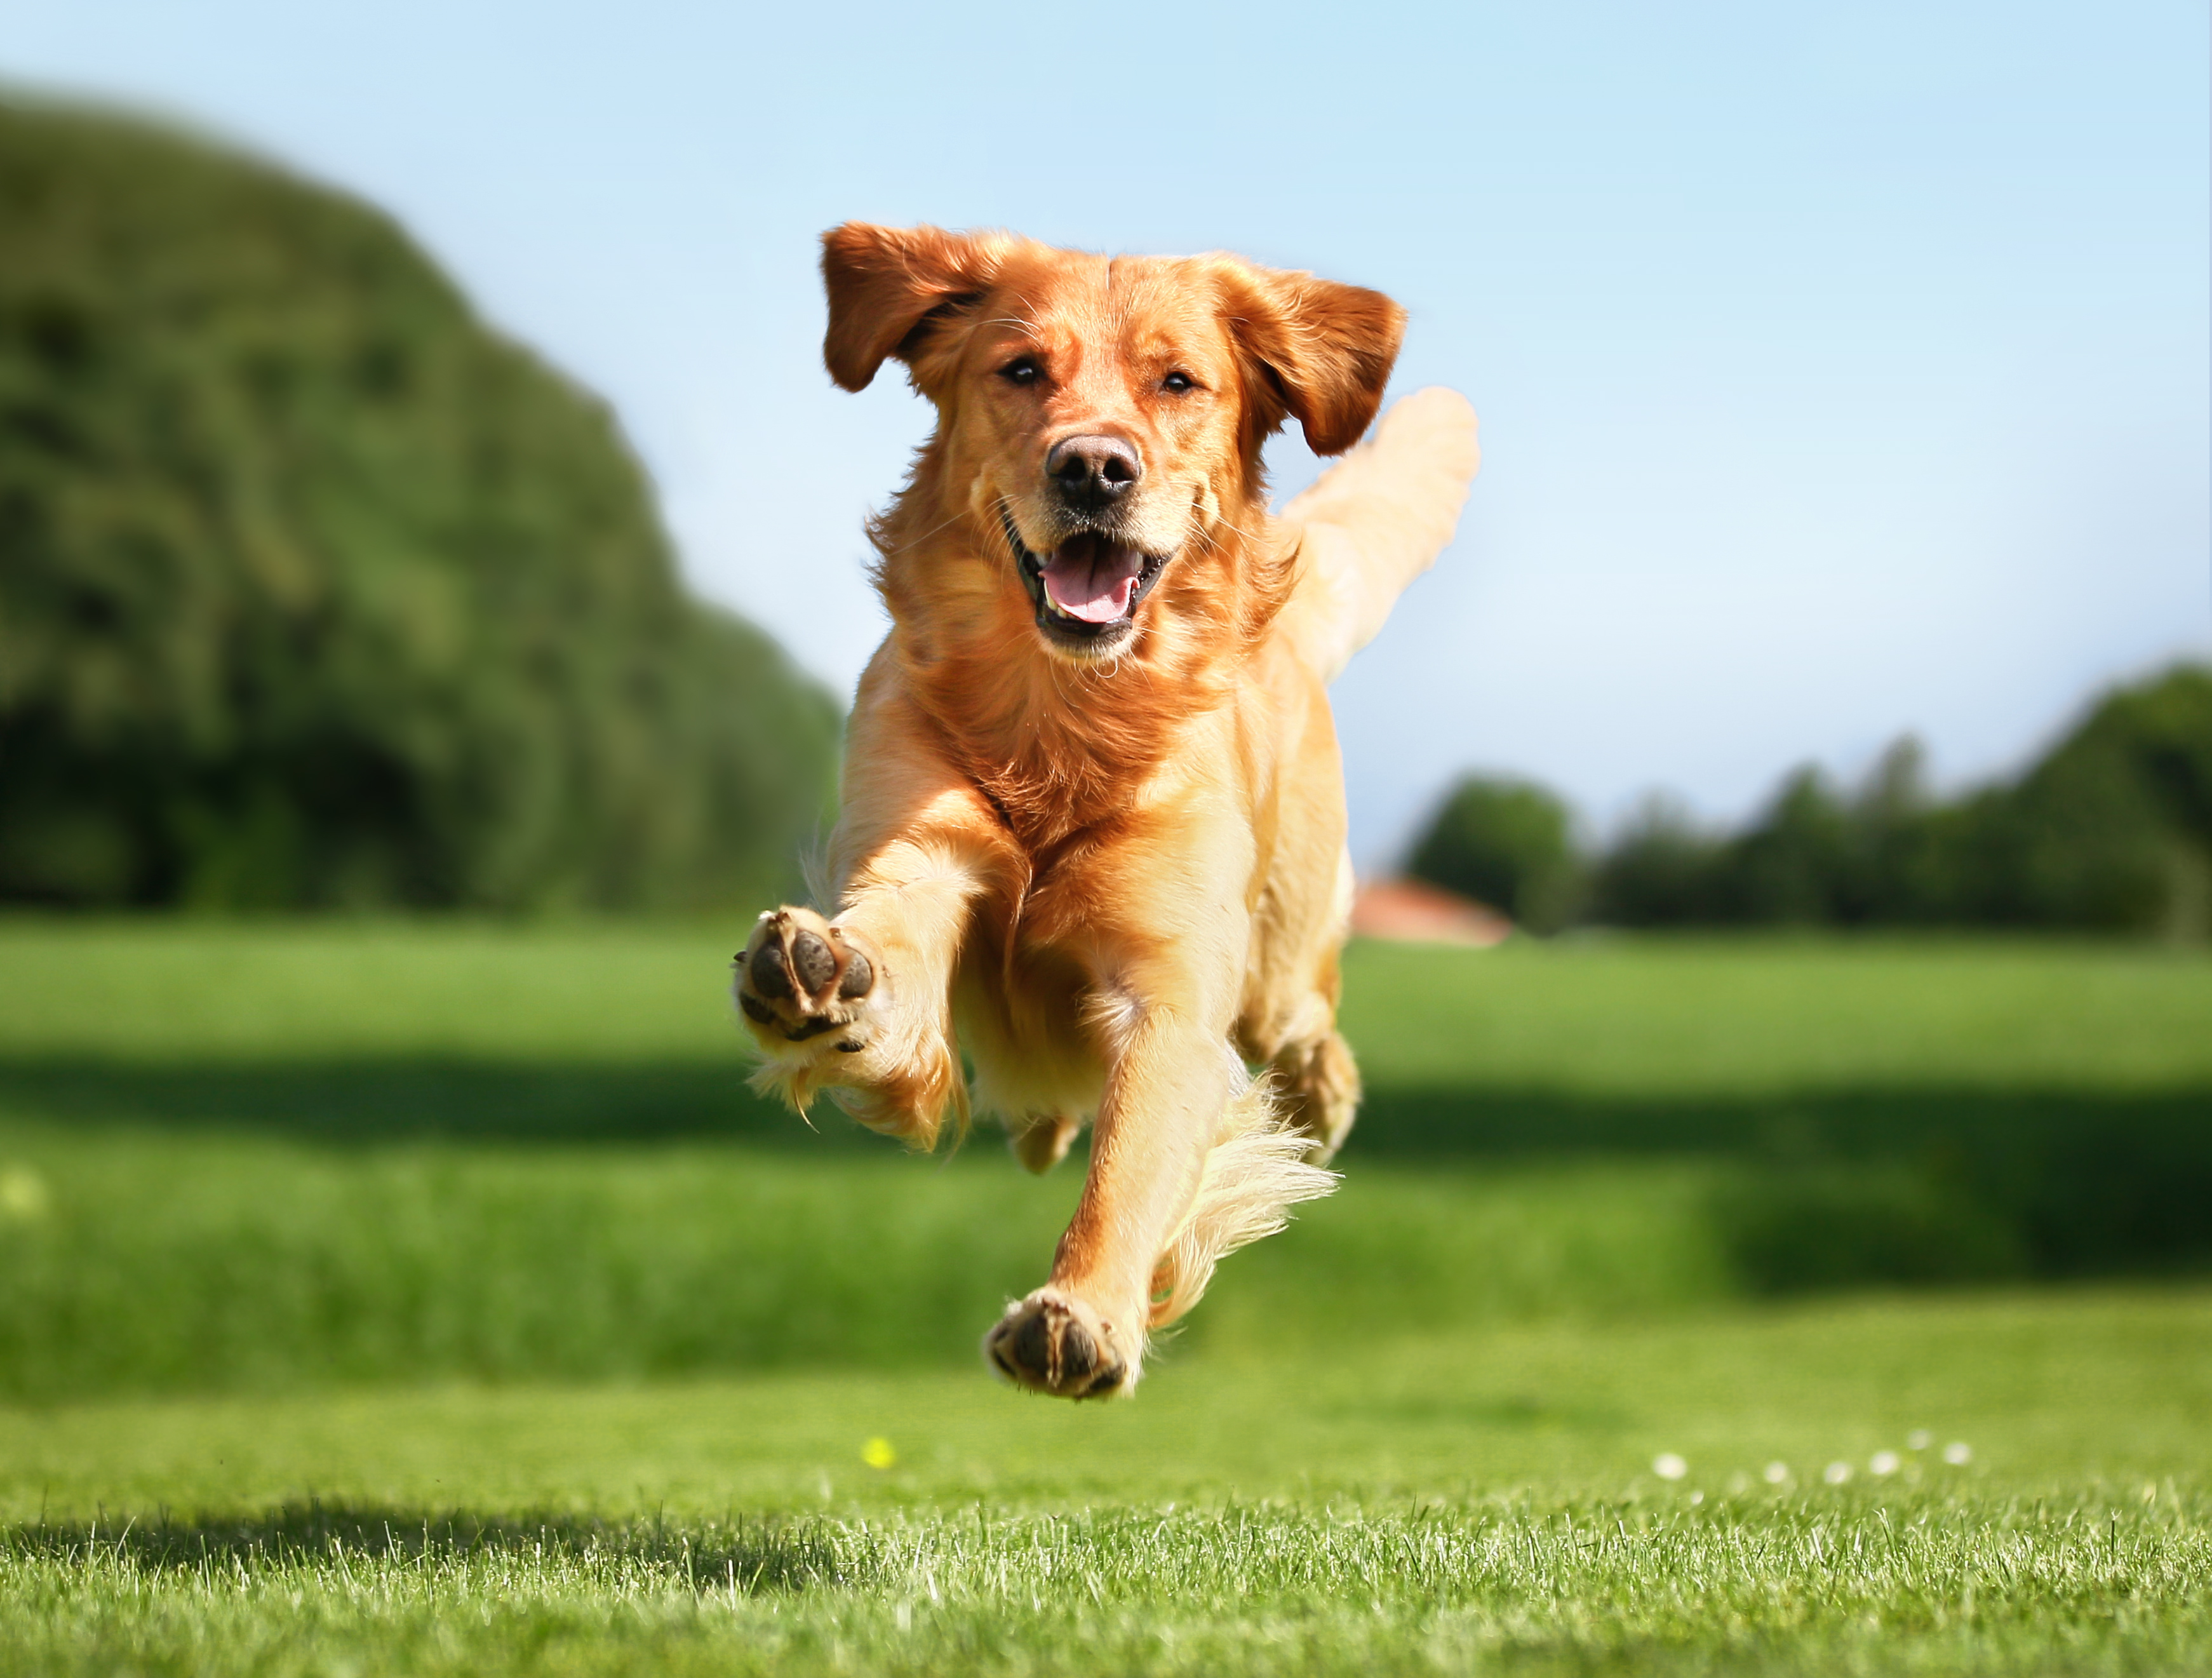 Running Dog Background | Gallery Yopriceville - High-Quality Images ...